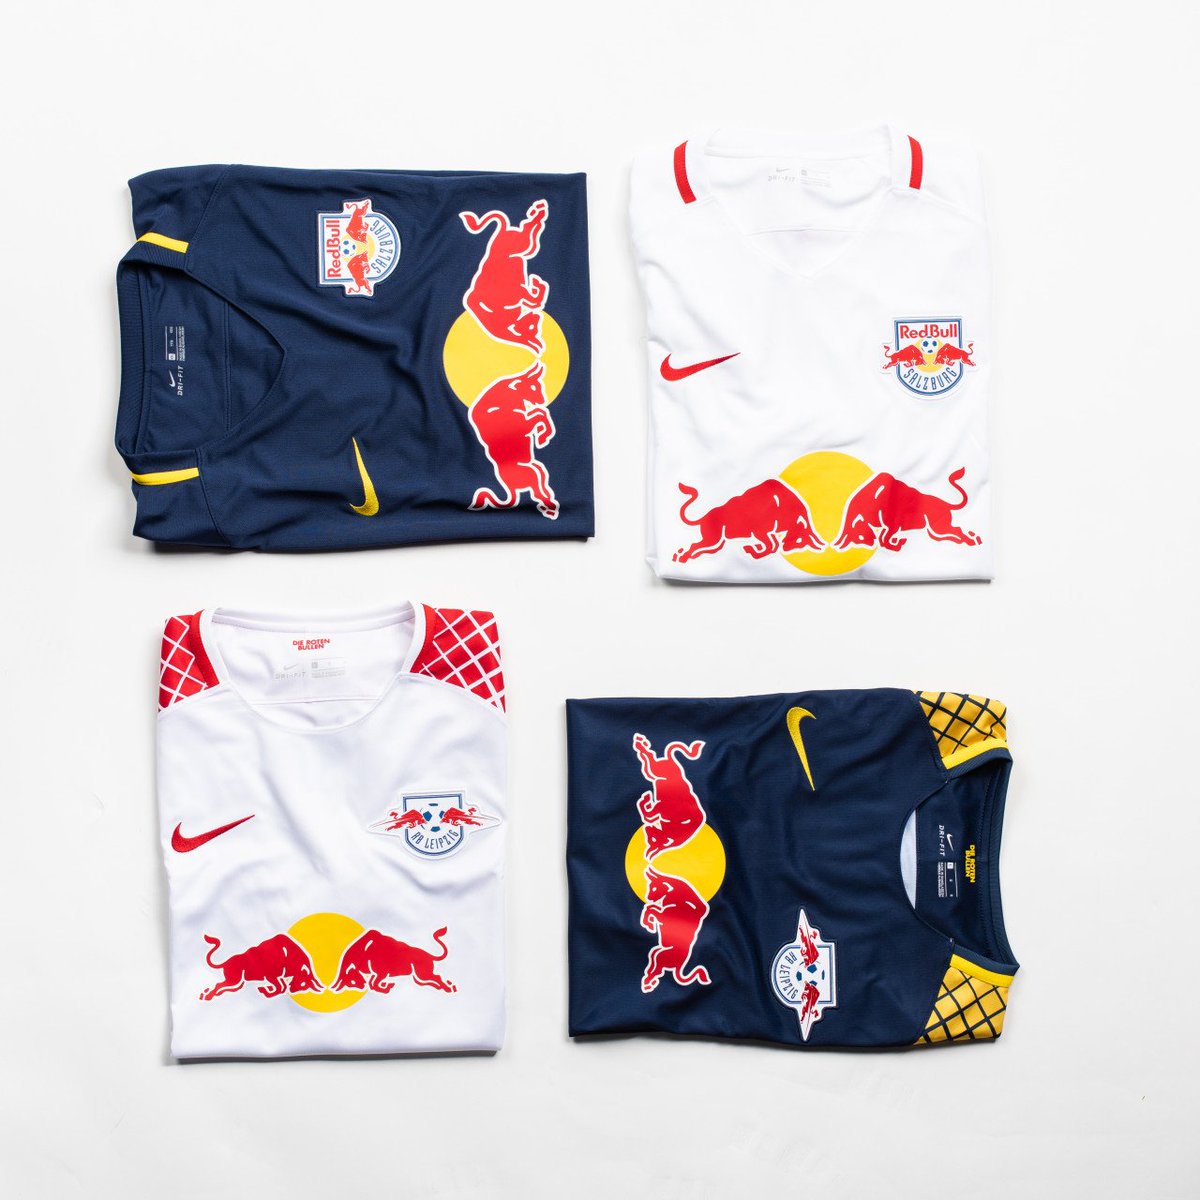 World Soccer Shop The Battle Of The Red Bulls The Red Bull Derby Between Rb Leipzig And Rb Salzburg In The Europa League Check Out Our Instagram Account